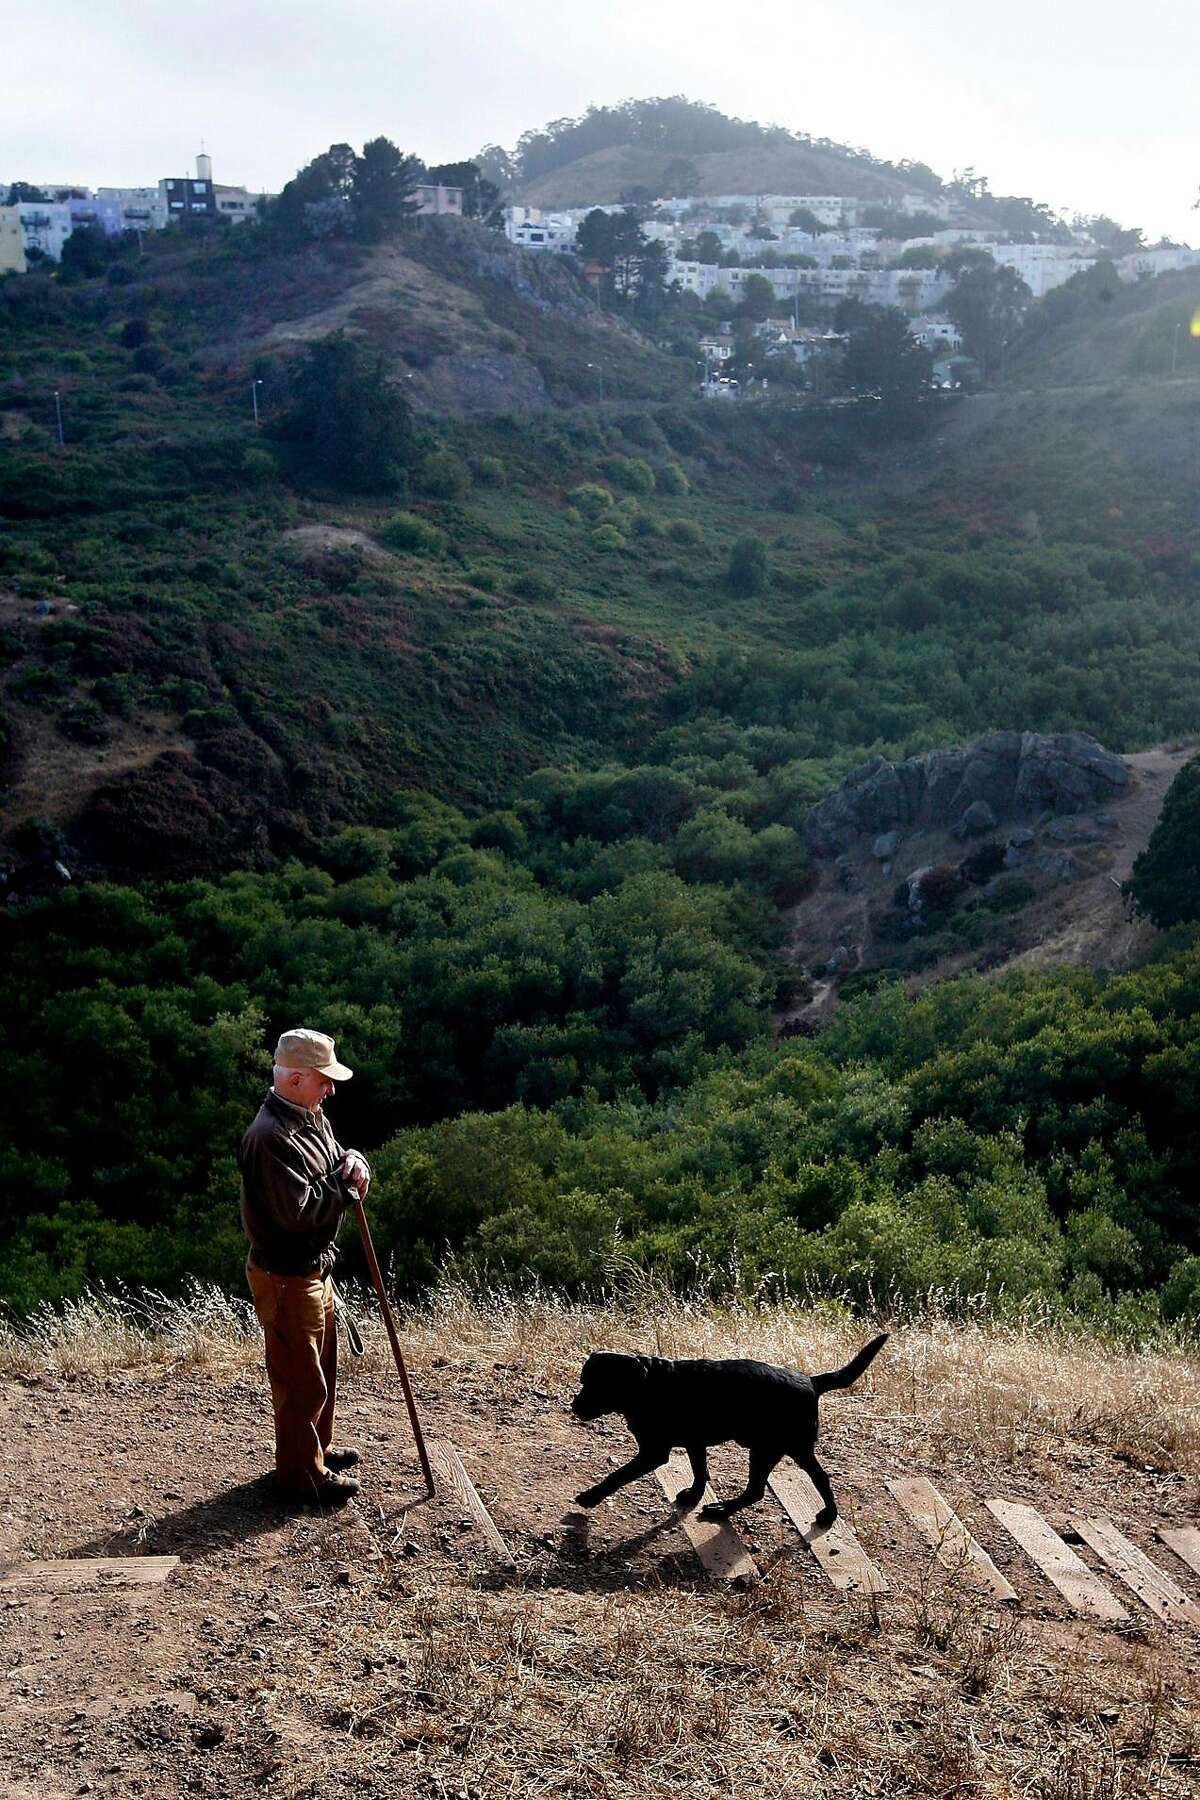 Leo Hainzl, who took daily 6-mile walks with his dogs in Glen Canyon Park, visits the park with his dog Fritz in 2008. Last year, he was slain while walking in the park with his dog Rip.